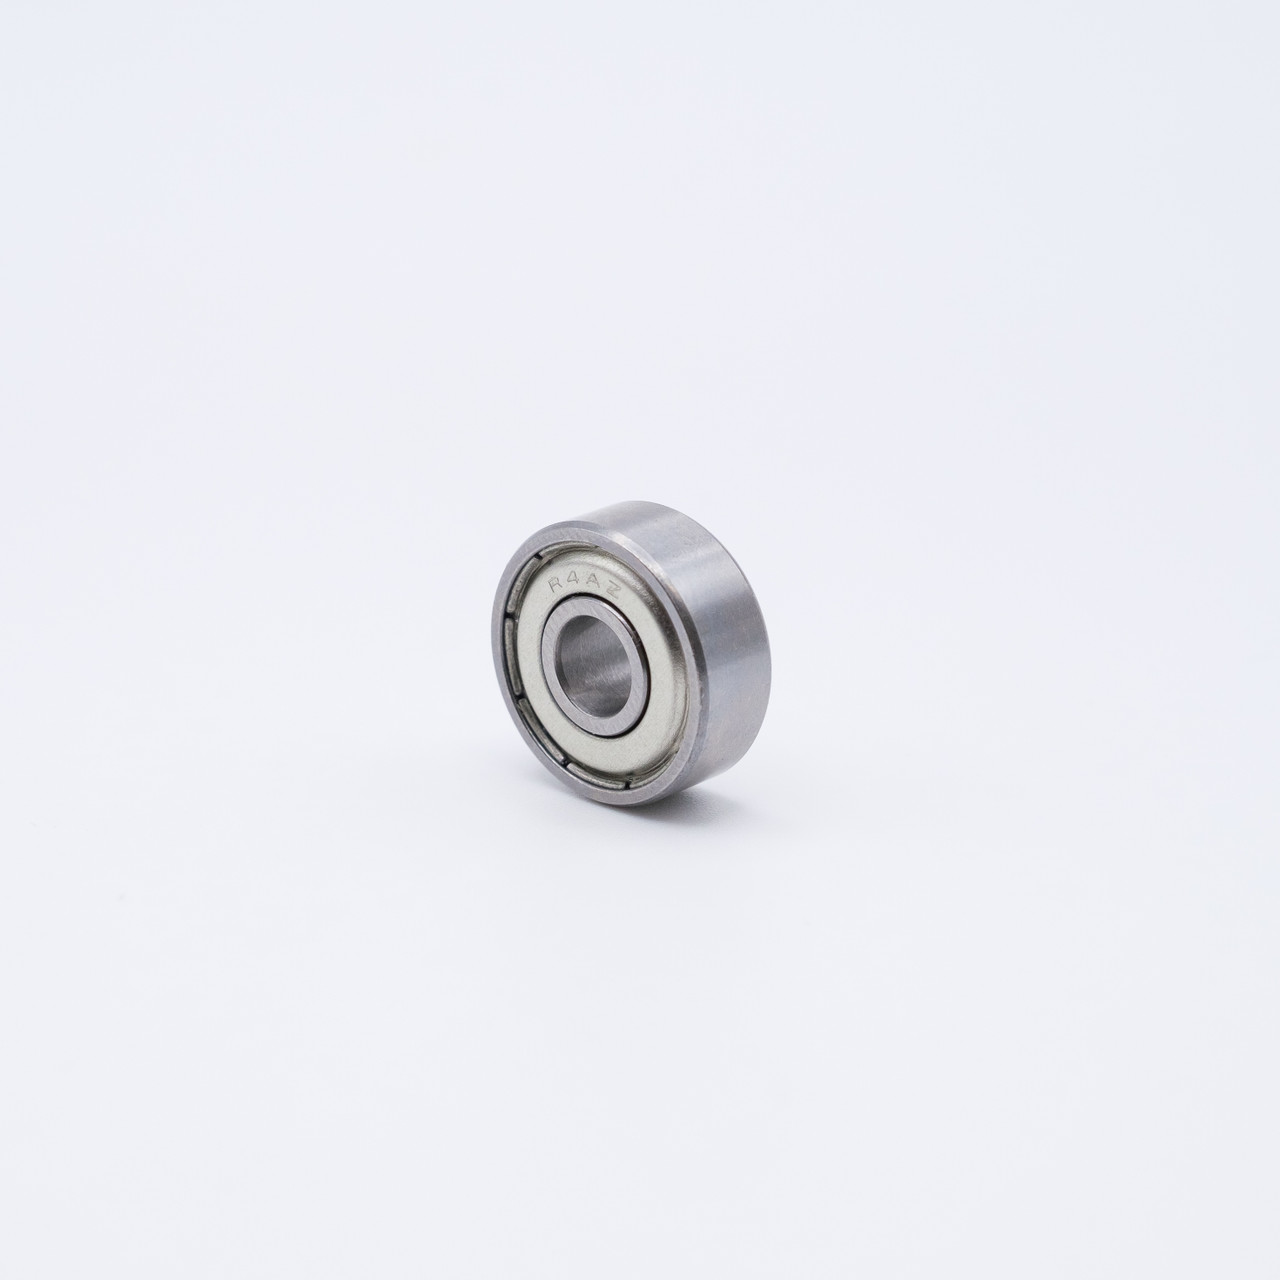 SSR188-ZZ Stainless Steel Miniature Ball Bearing 1/4x1/2x3/16 Angled View